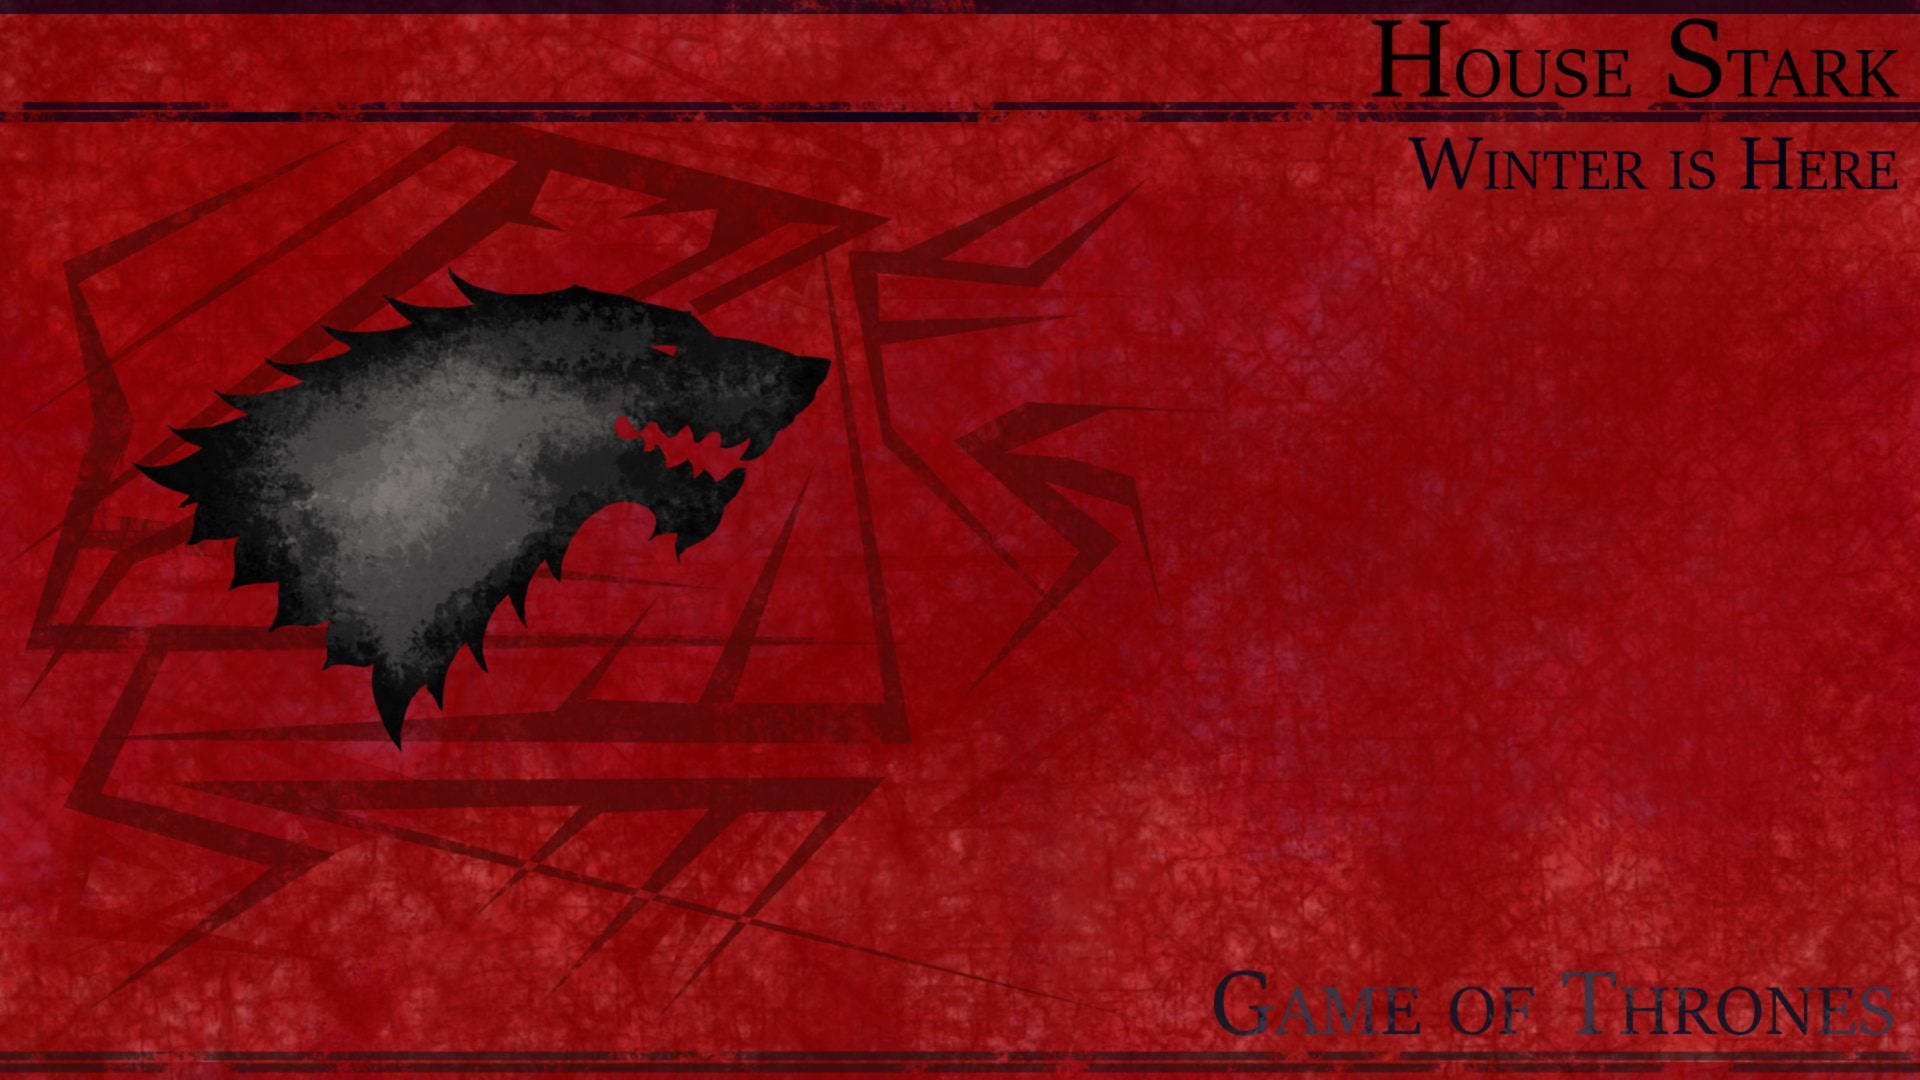 Free House Stark Wallpaper Downloads, [100+] House Stark Wallpapers for  FREE 